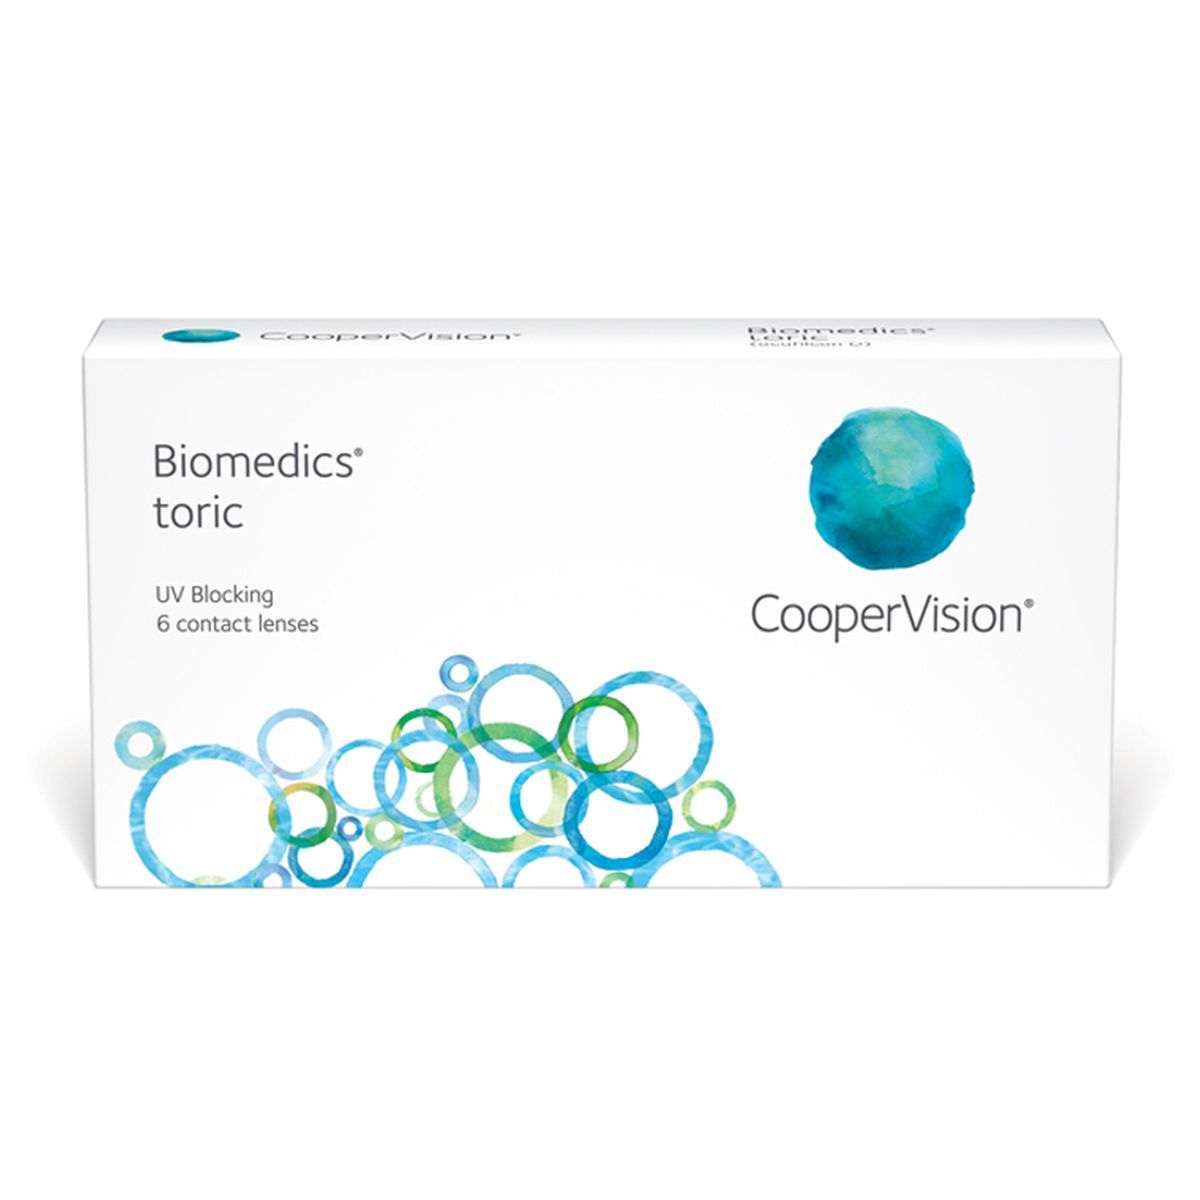 BIOMEDICS TORIC MONTHLY DISPOSABLE BIOMIMETIC CONTACT LENSES FOR ASTIGMATISM (6 LENSES)